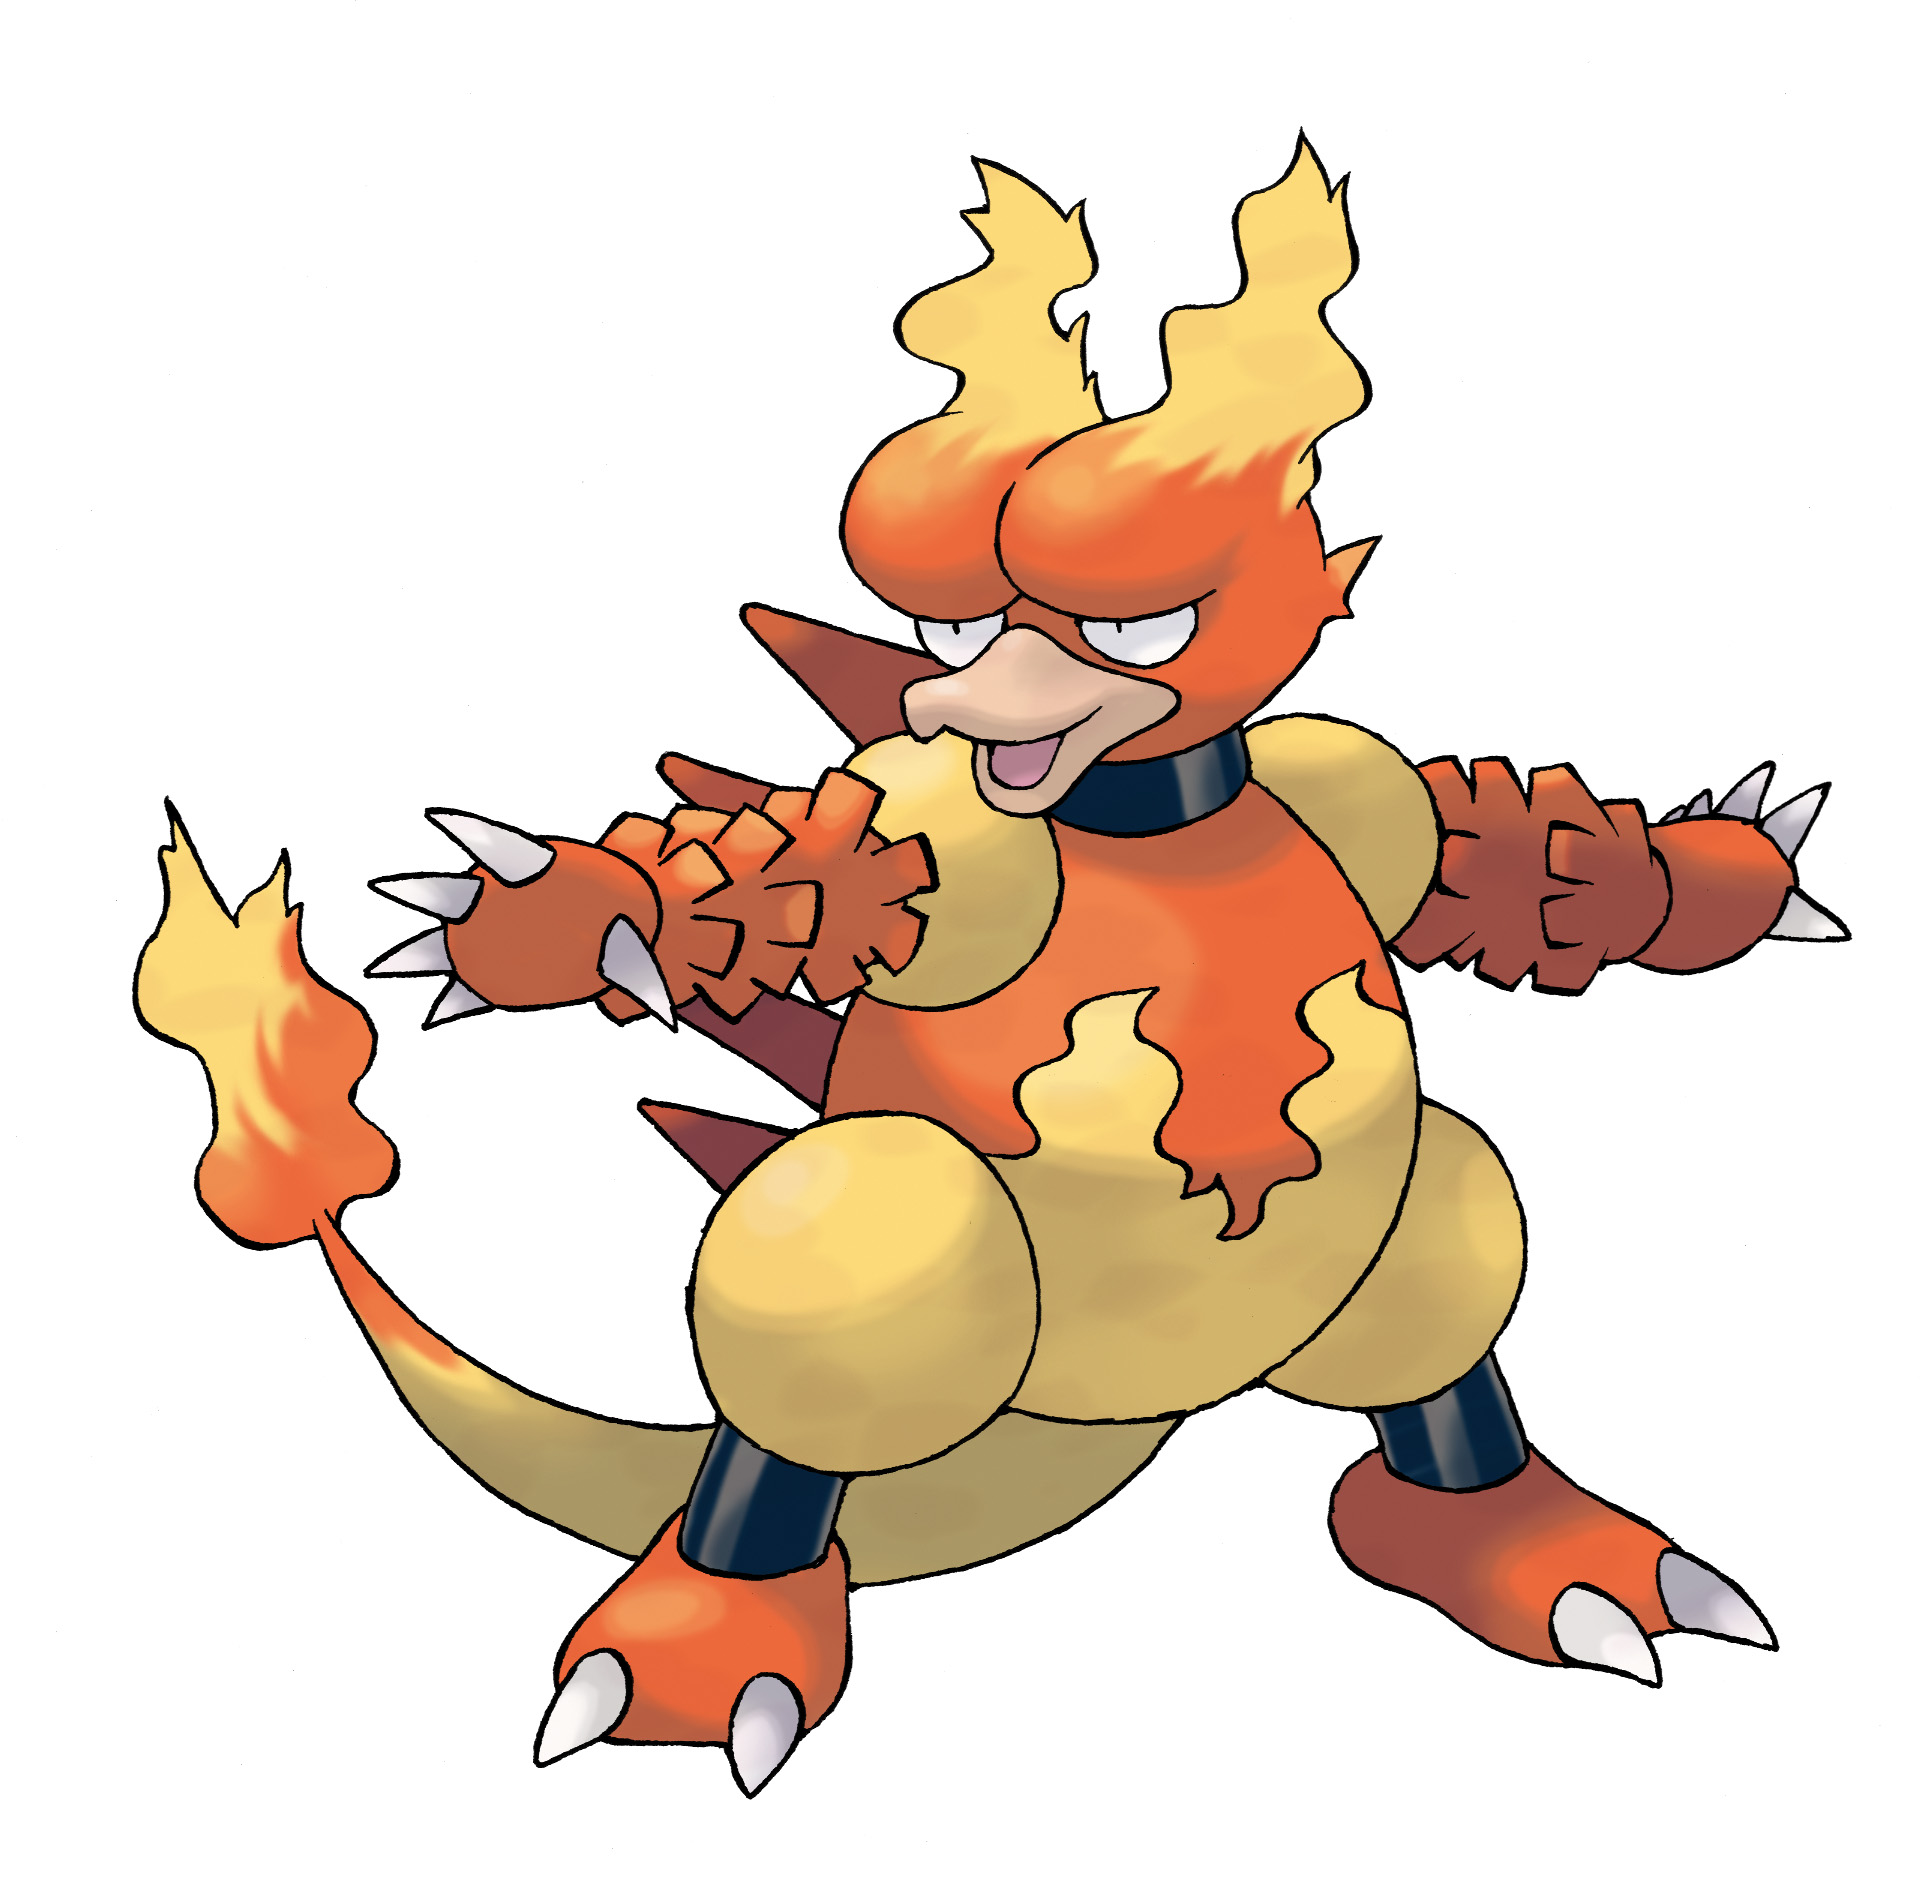 GAME to distribute Magmar/Electabuzz for X/Y